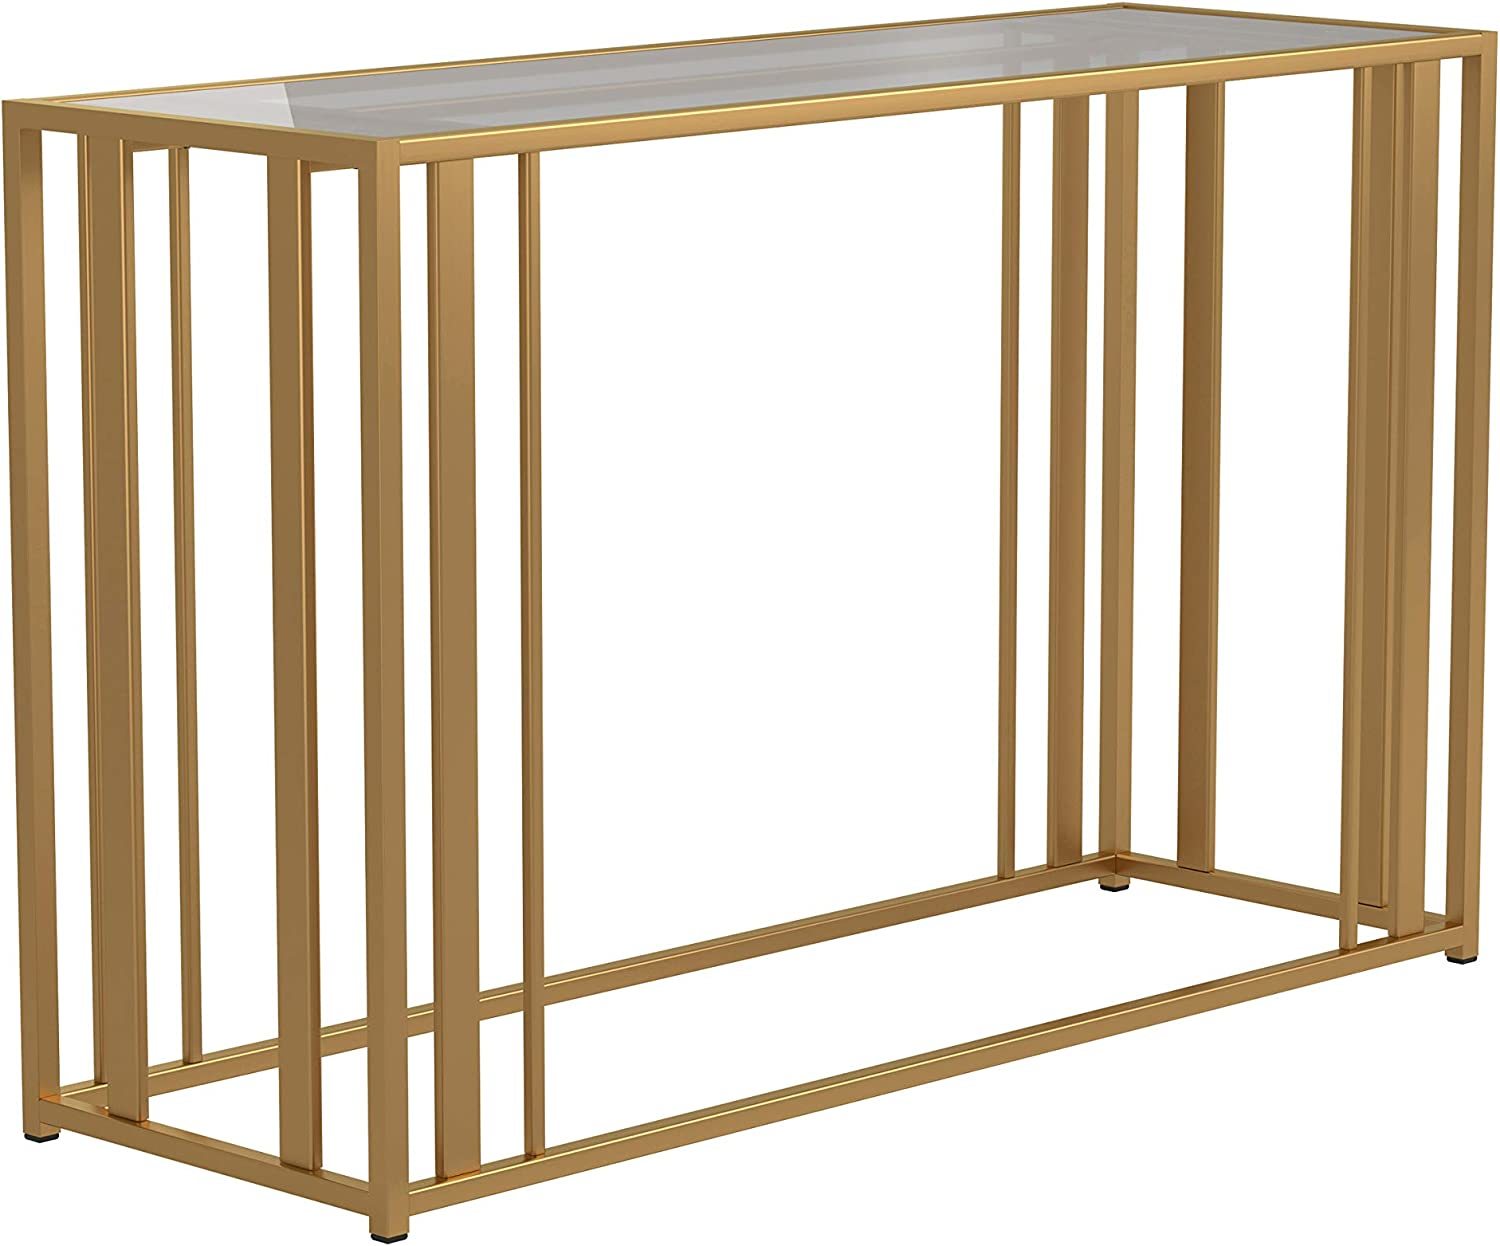 Eastbrook Metal Frame Sofa Table, Matte Brass And Clear, By Coaster Home - $235.99